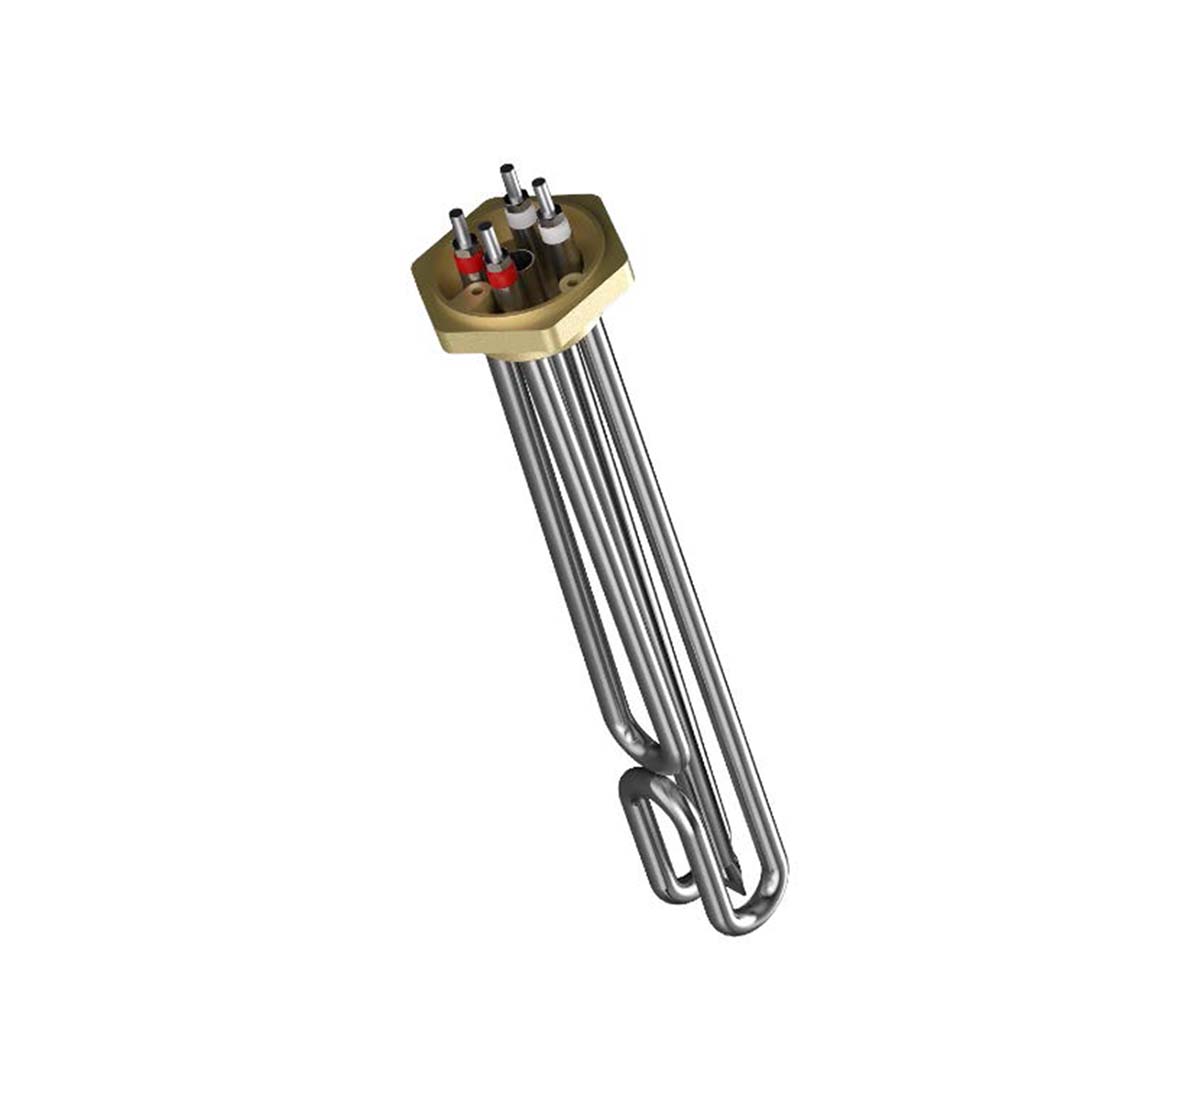 A picture of a Backer immersion heater for liquid heating with element tubes in acidproof stainless steel